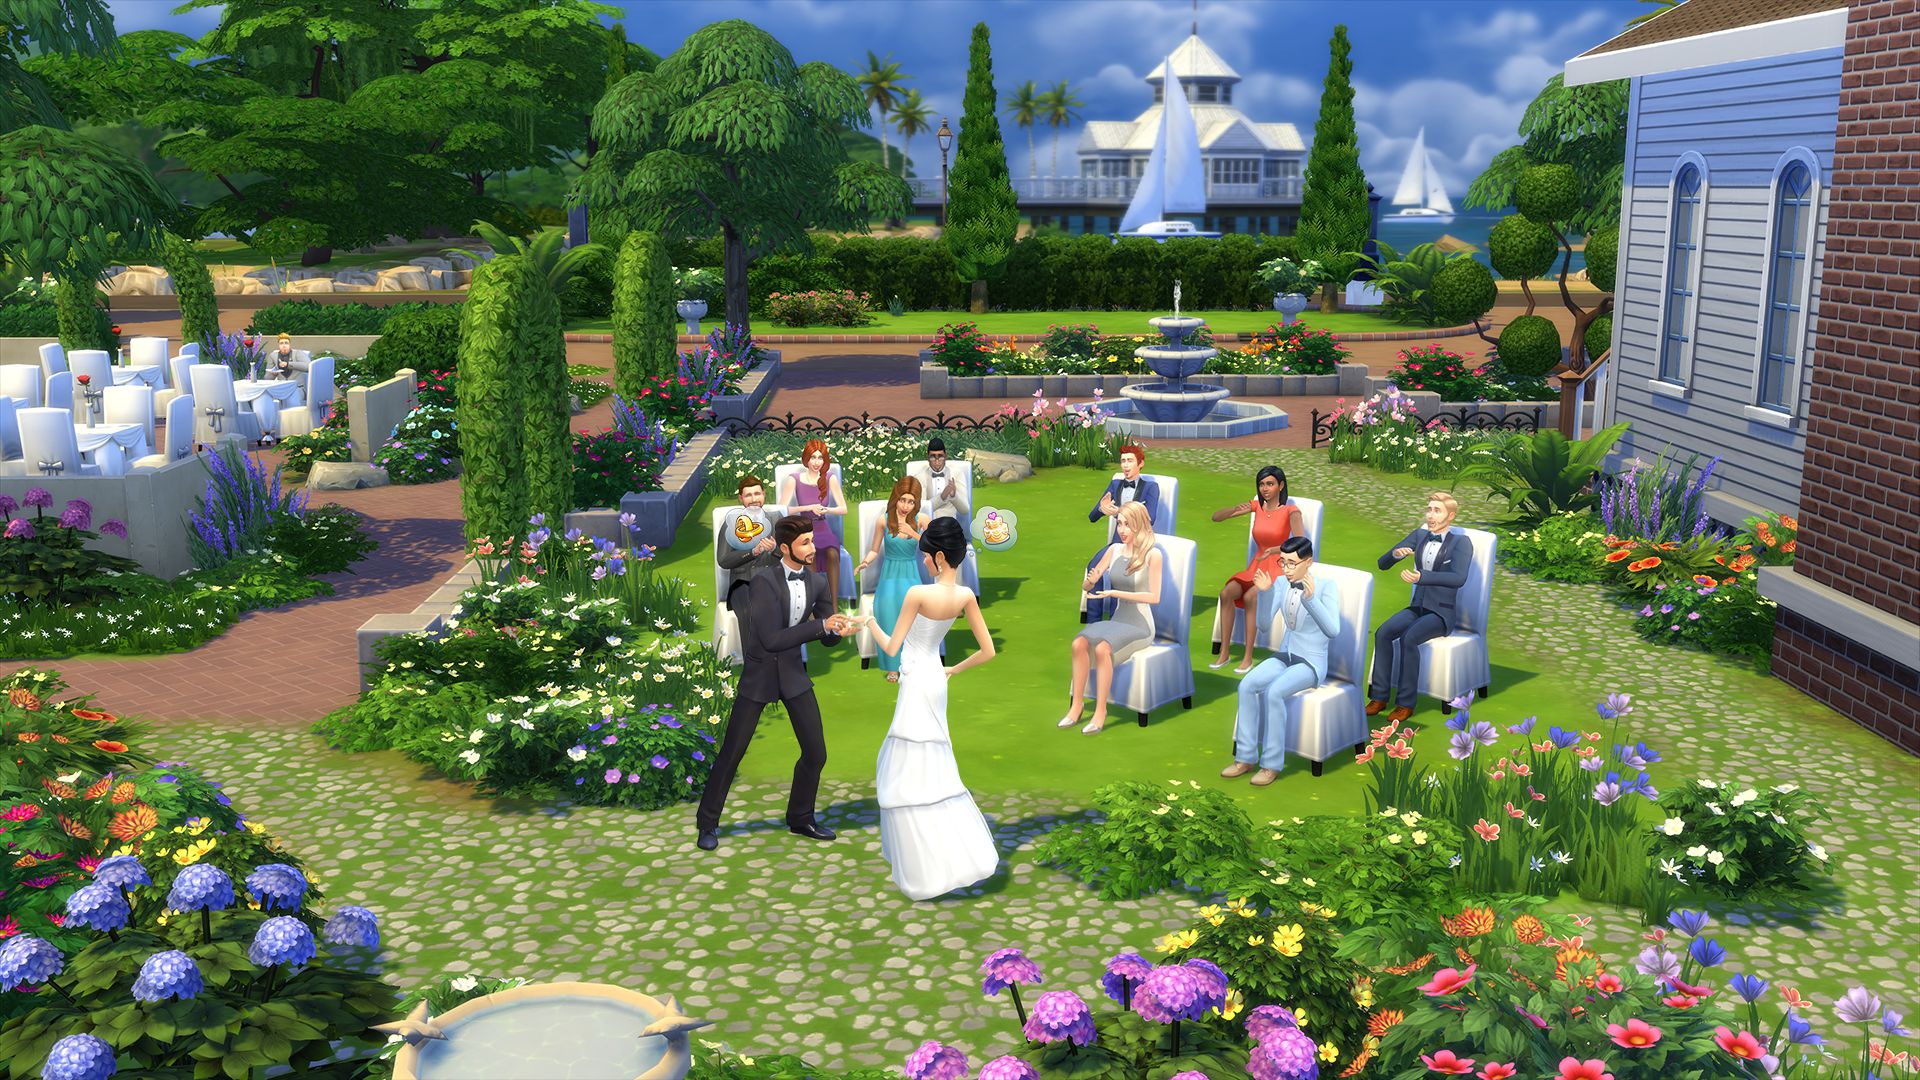 HD desktop wallpaper: People, Wedding, Flower, Garden, Video Game, The Sims  4, The Sims download free picture #940454